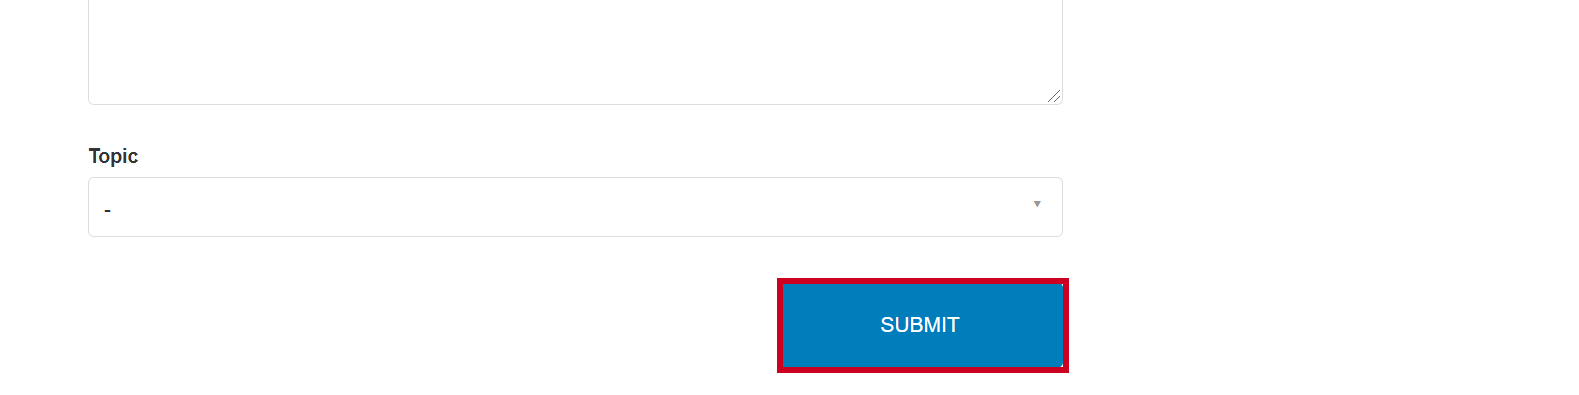 select_submit.png